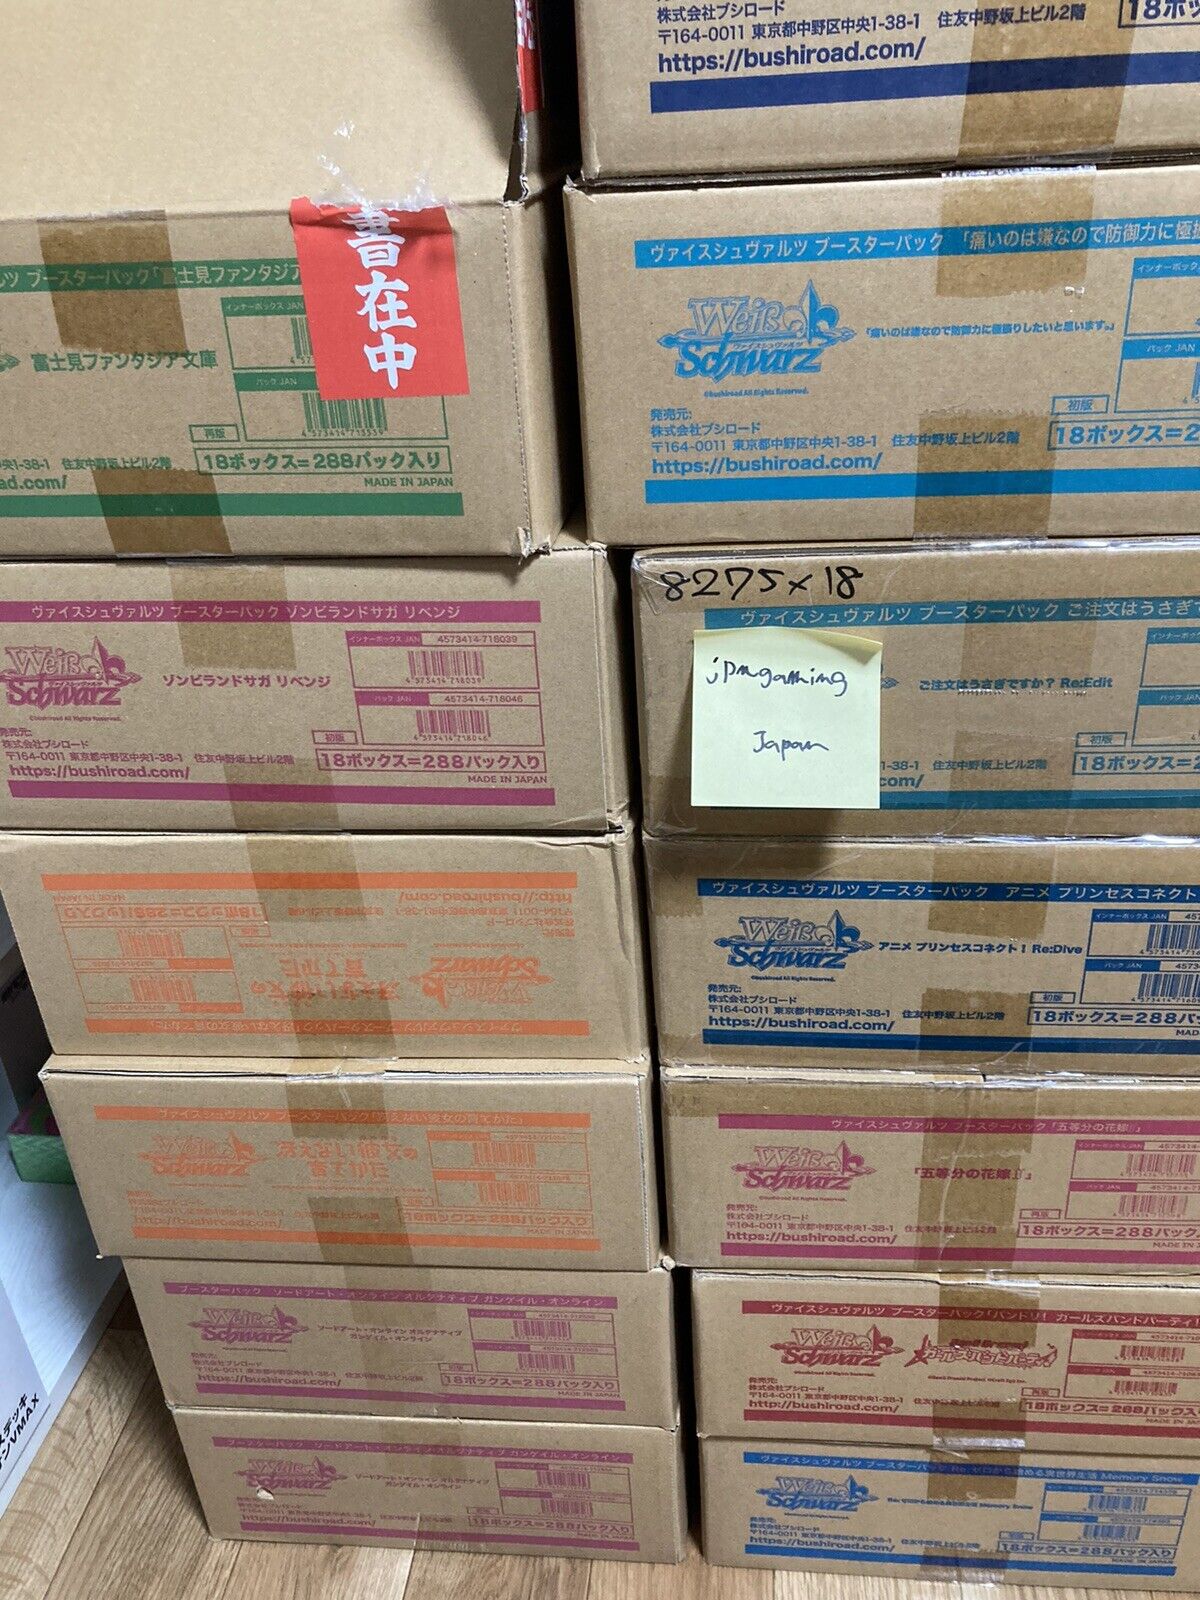 4 BOXES One Piece TCG Paramount War OP-02 Booster Box Japanese version FedEx IP